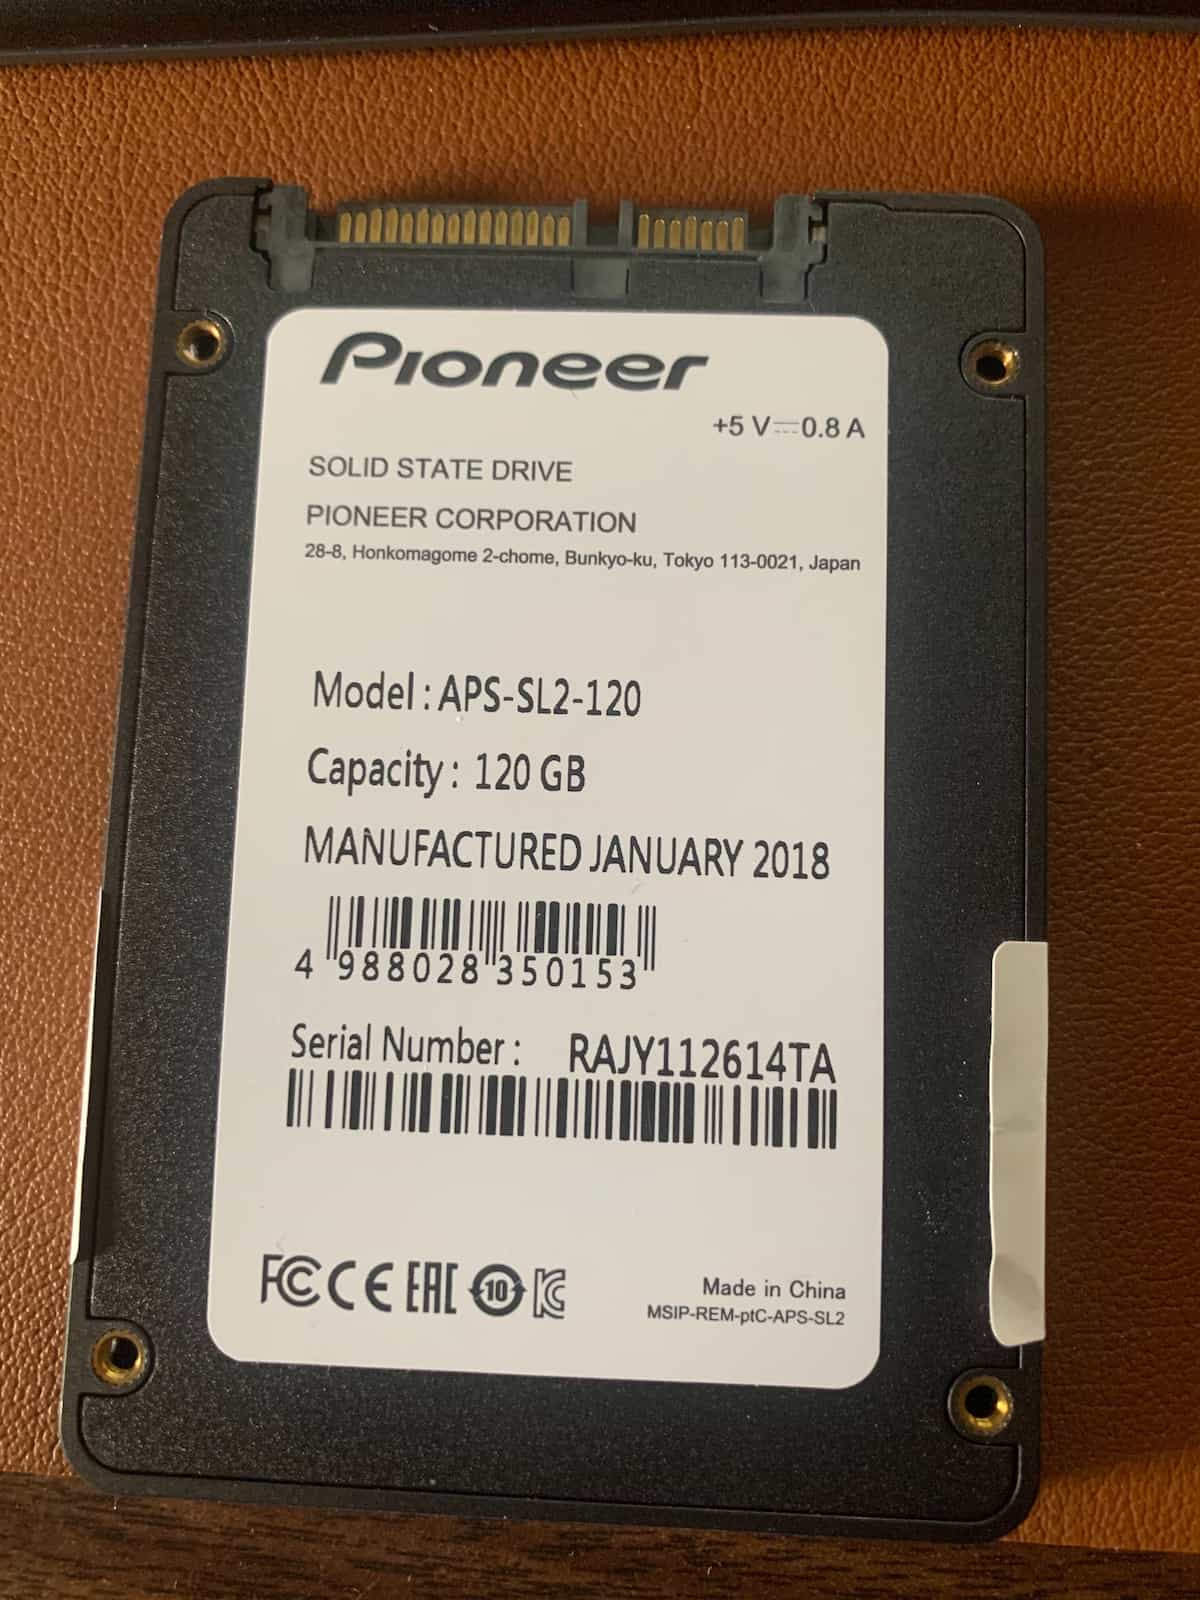 Pioneer solid state drive that was not showing up on computer